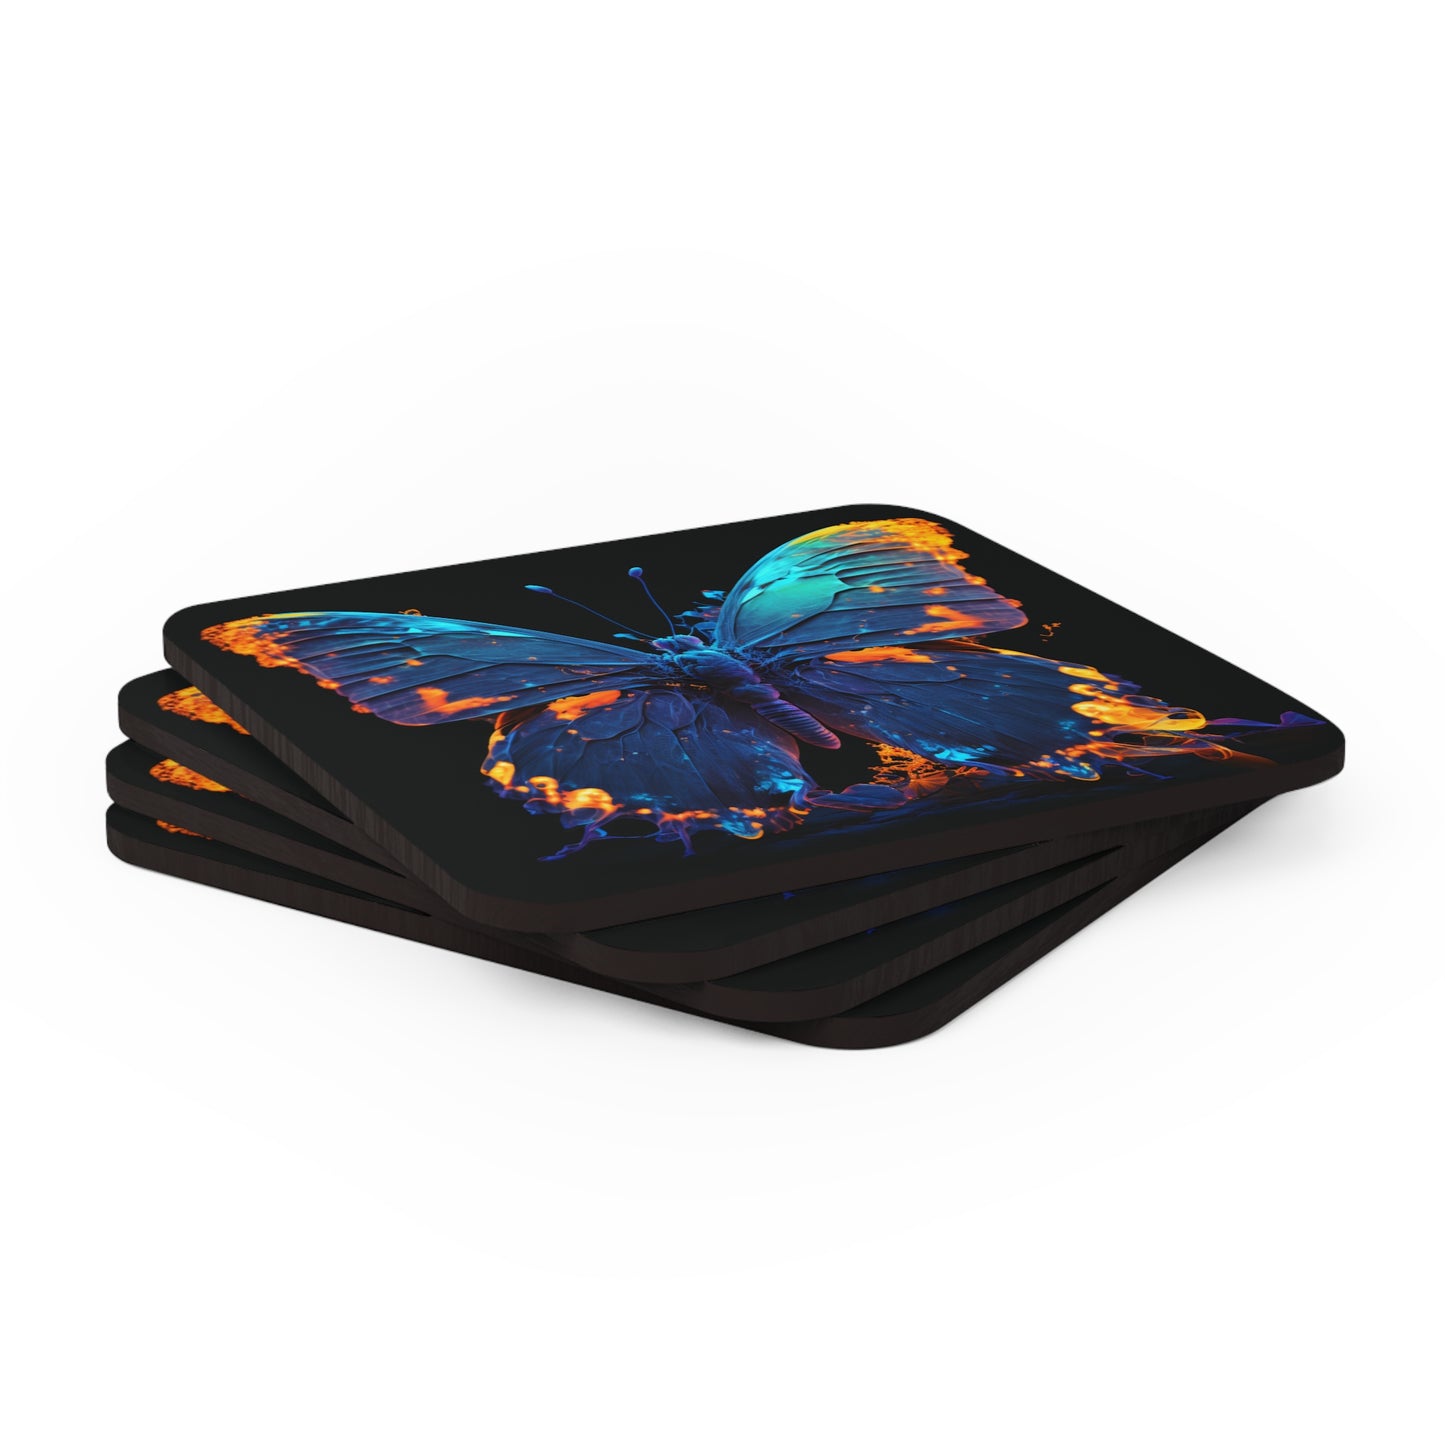 Corkwood Coaster Set Thermal Butterfly 3